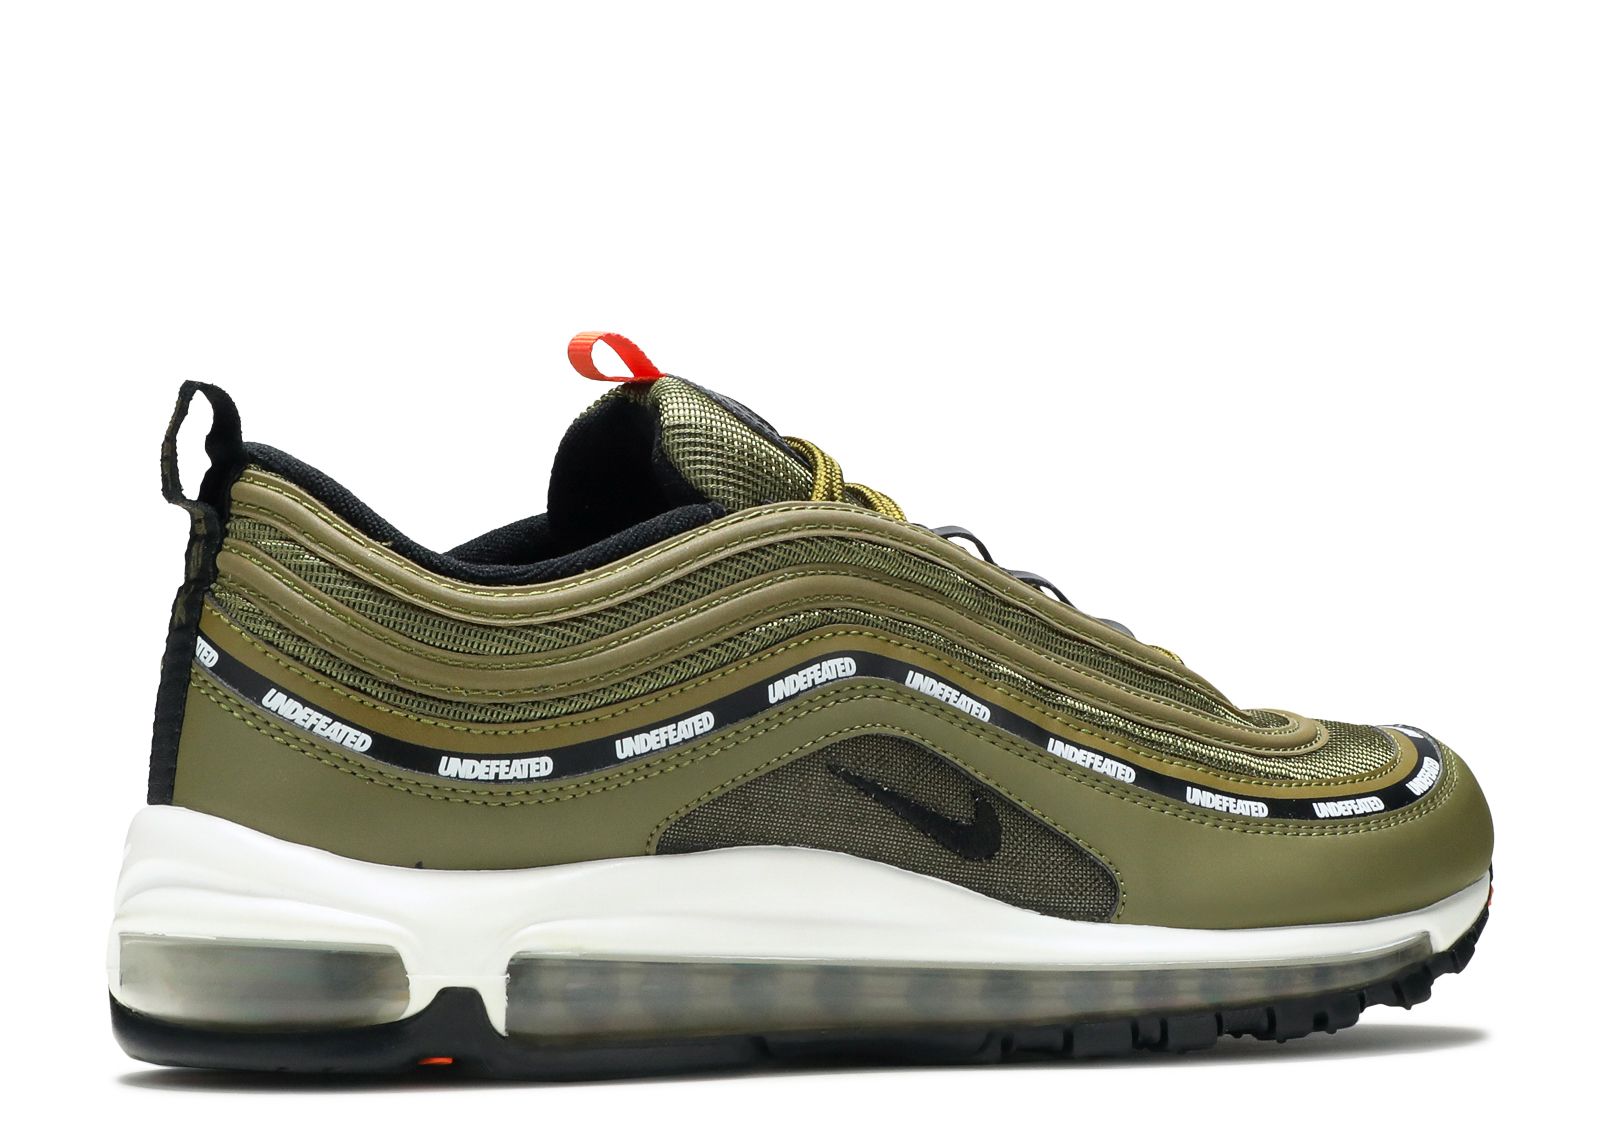 air max 97 undefeated olive green